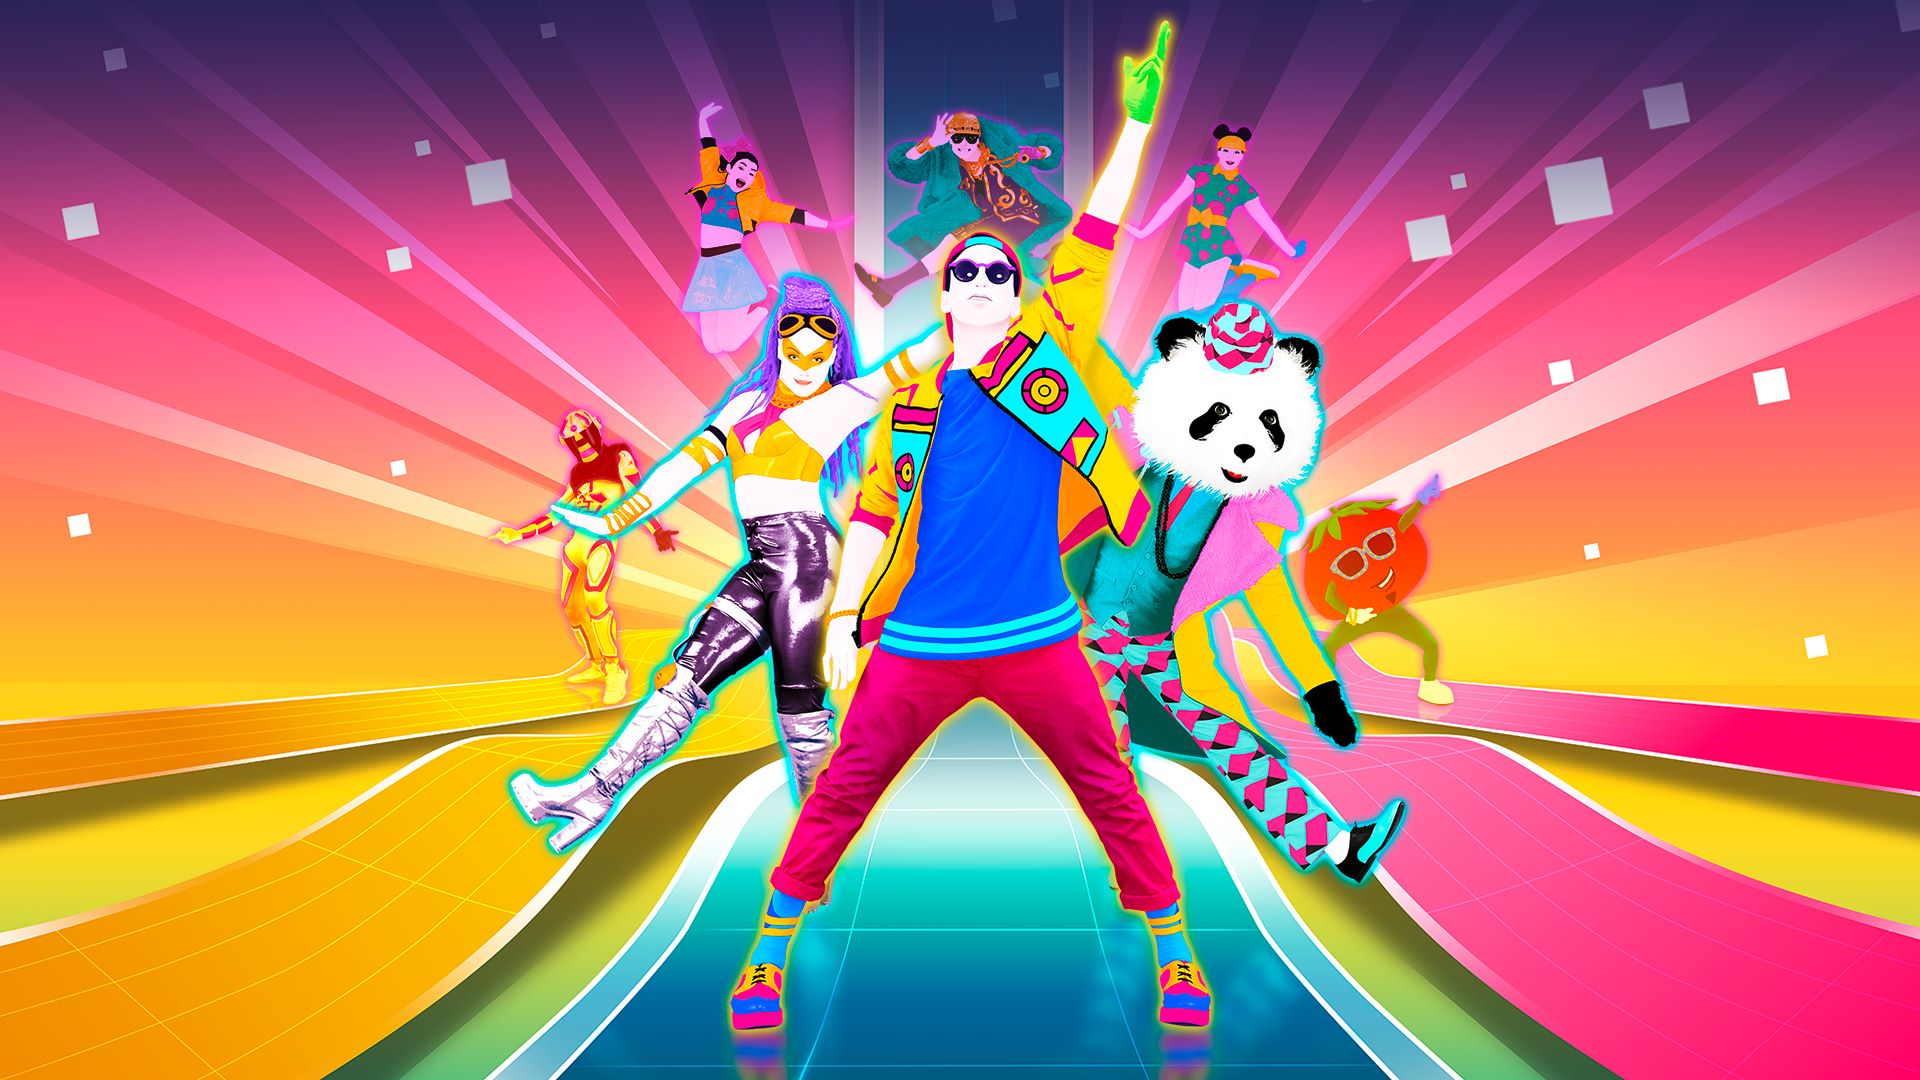 Just Dance Unlimited song list | The Loadout